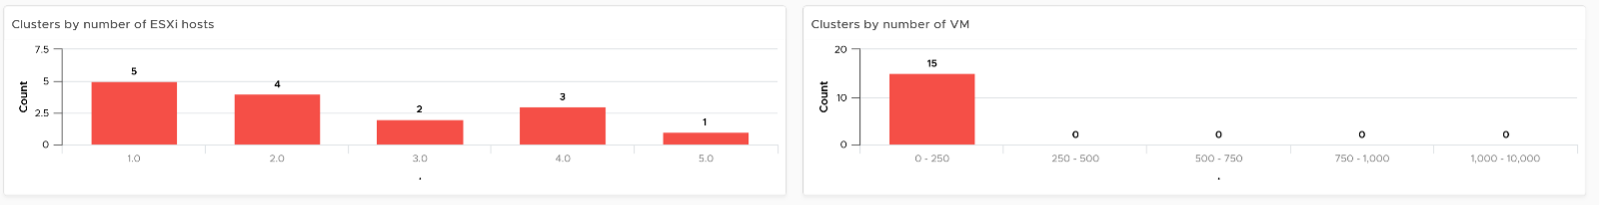 Cluster by number of Hosts